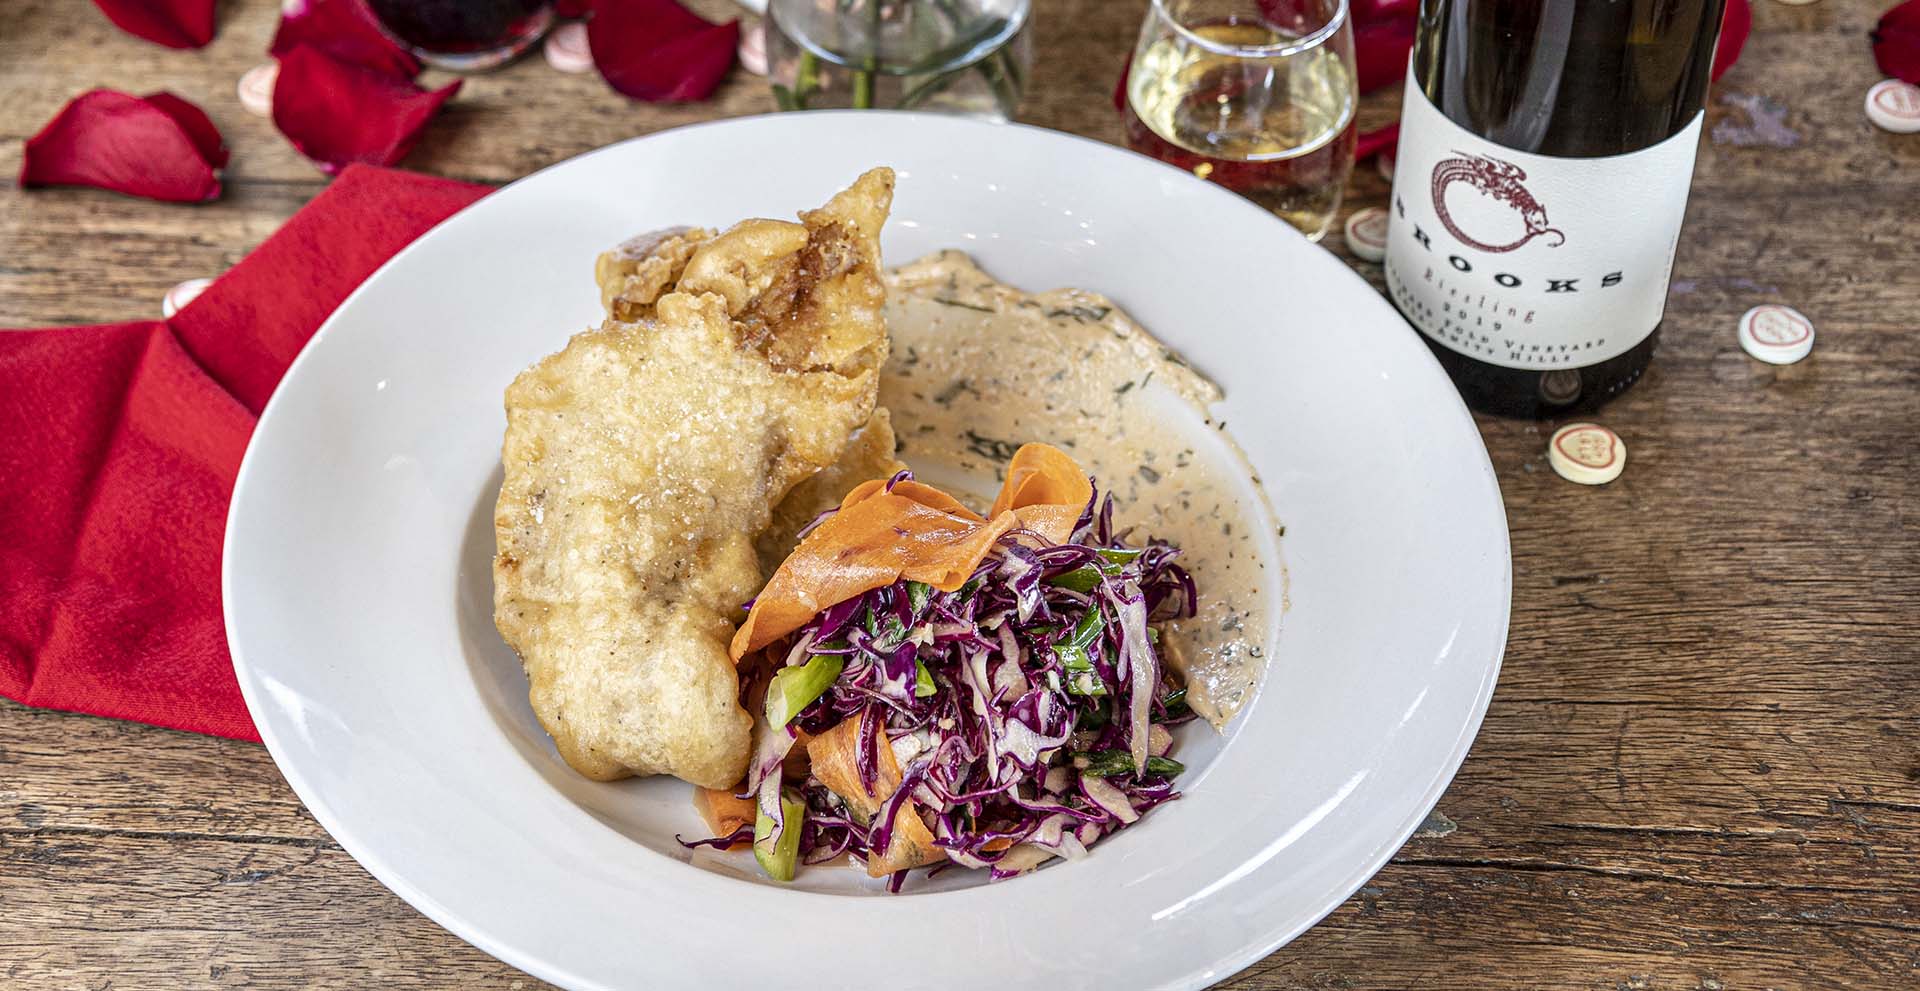 Golden fried rockfish with a cabbage slaw and remoulade